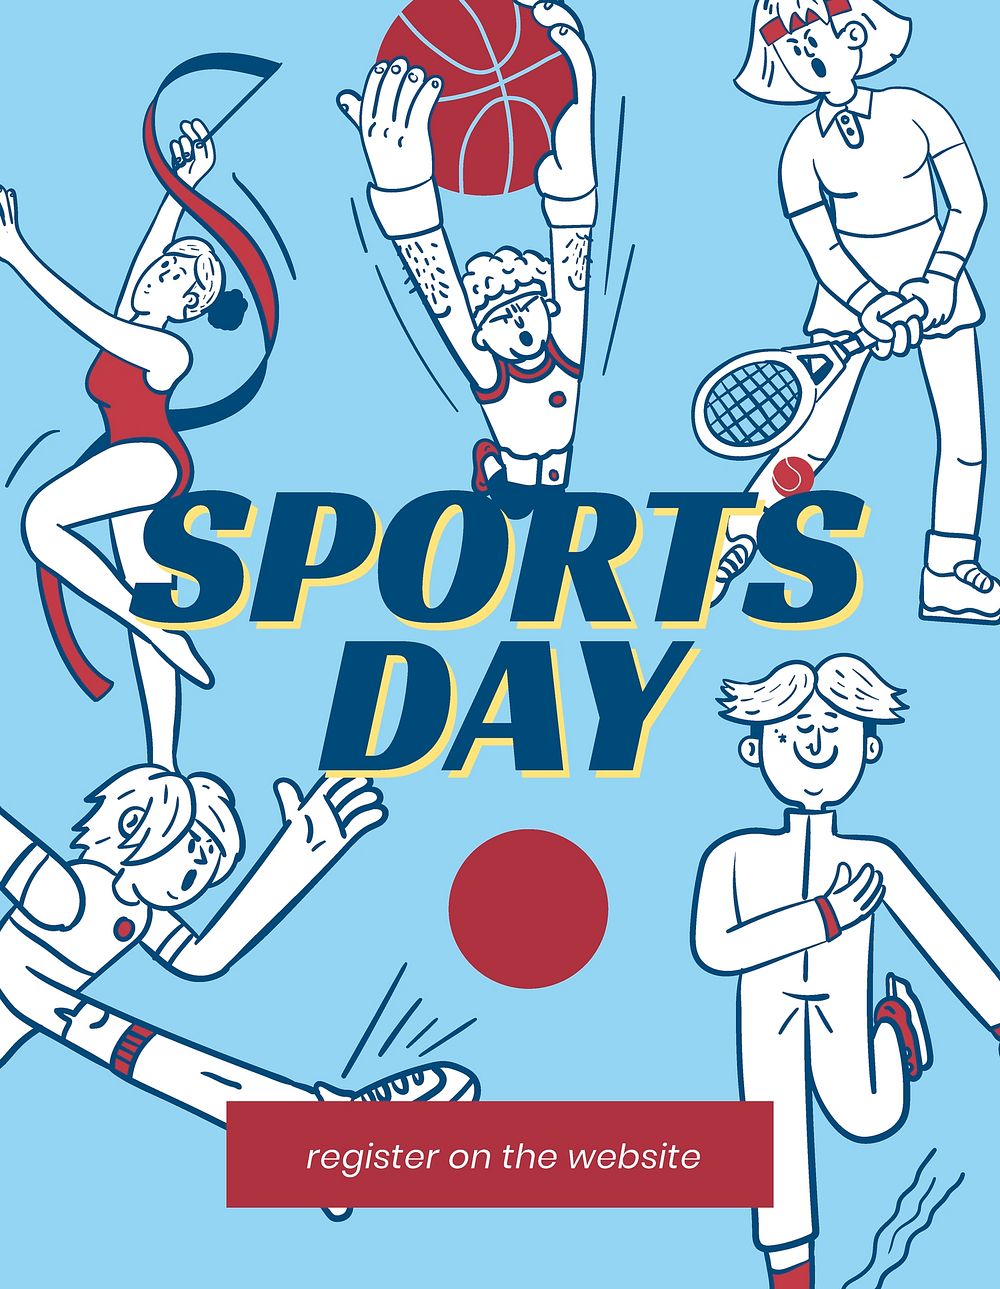 Sports day flyer template, cute athlete illustration vector